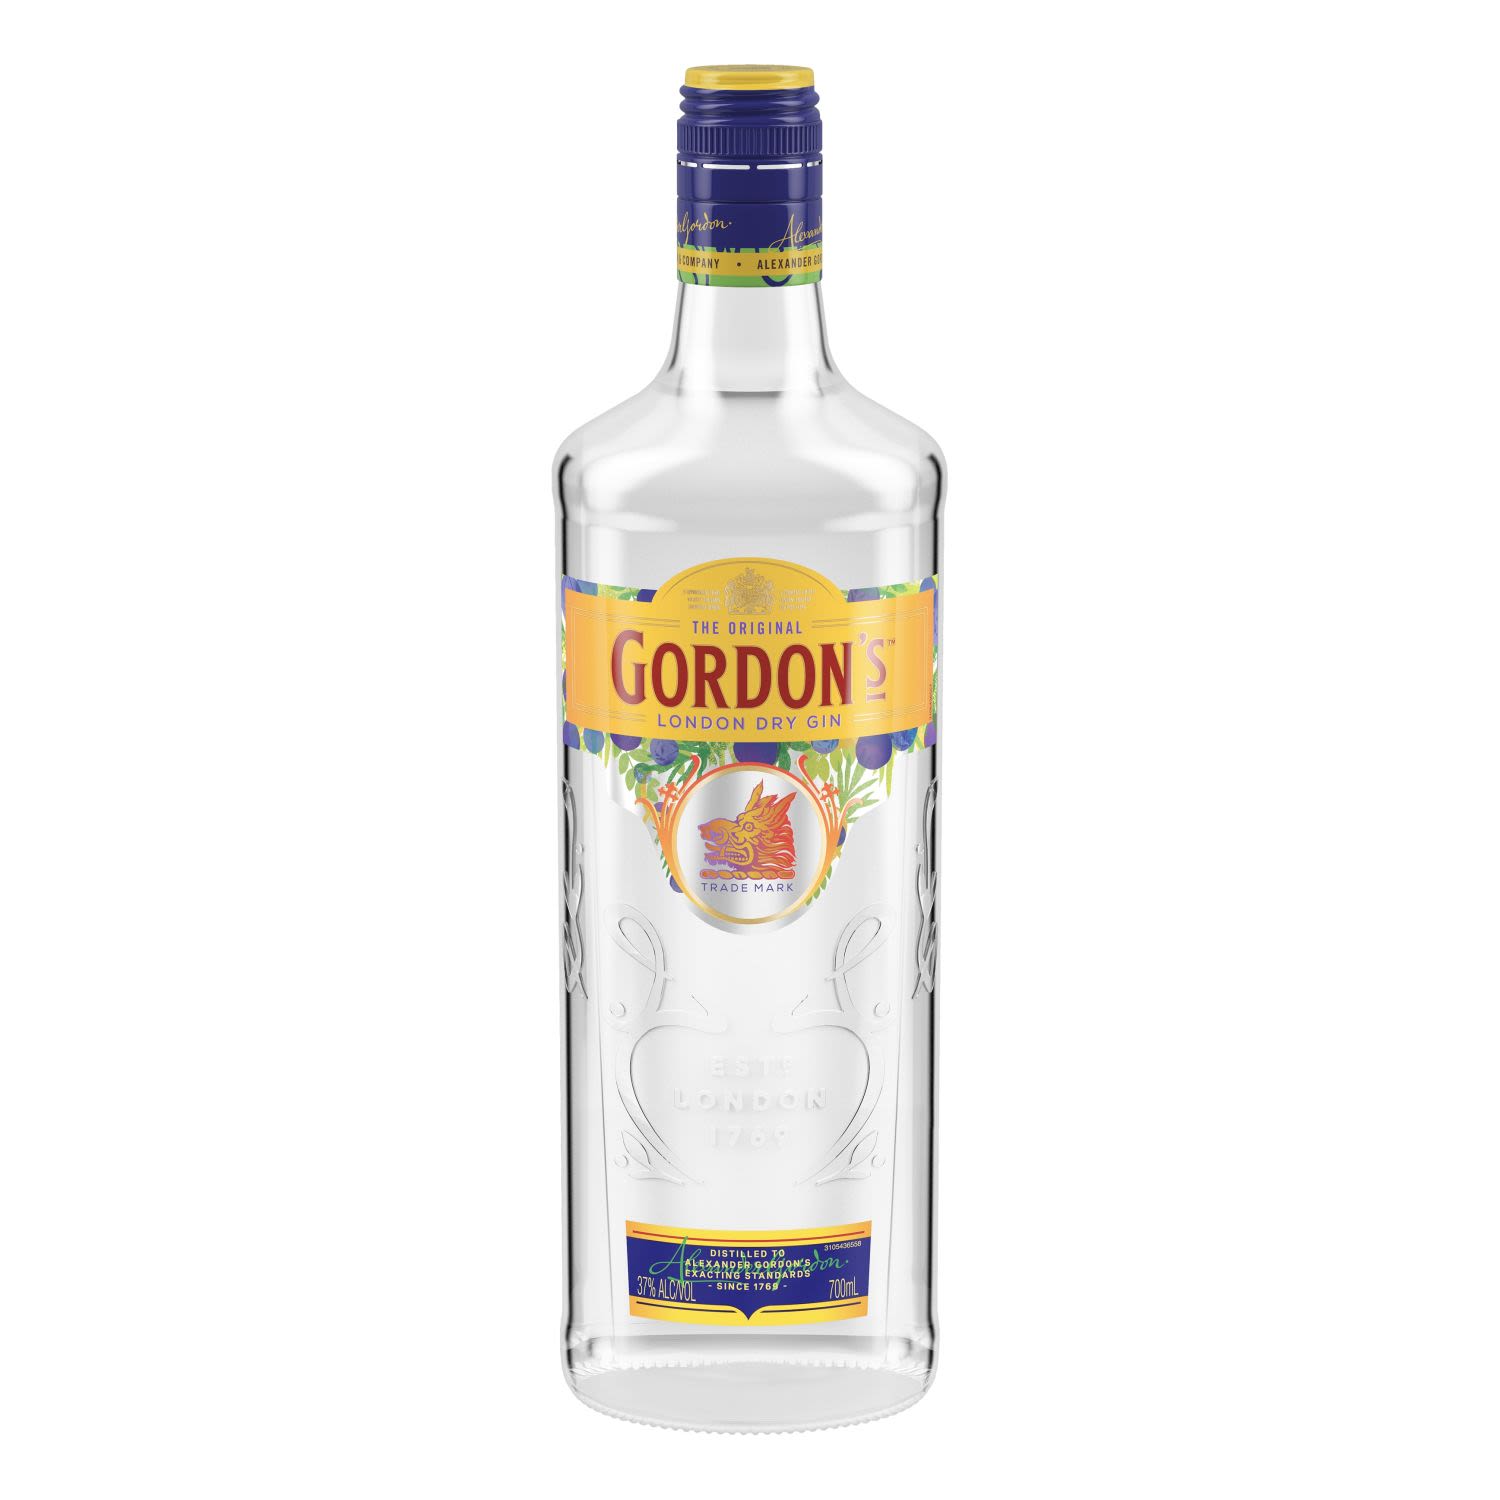 The distinctively refreshing taste comes from using only the finest ingredients including juniper, coriander seeds and angelica root<br /> <br />Alcohol Volume: 37.00%<br /><br />Pack Format: Bottle<br /><br />Standard Drinks: 20</br /><br />Pack Type: Bottle<br /><br />Country of Origin: United Kingdom<br />